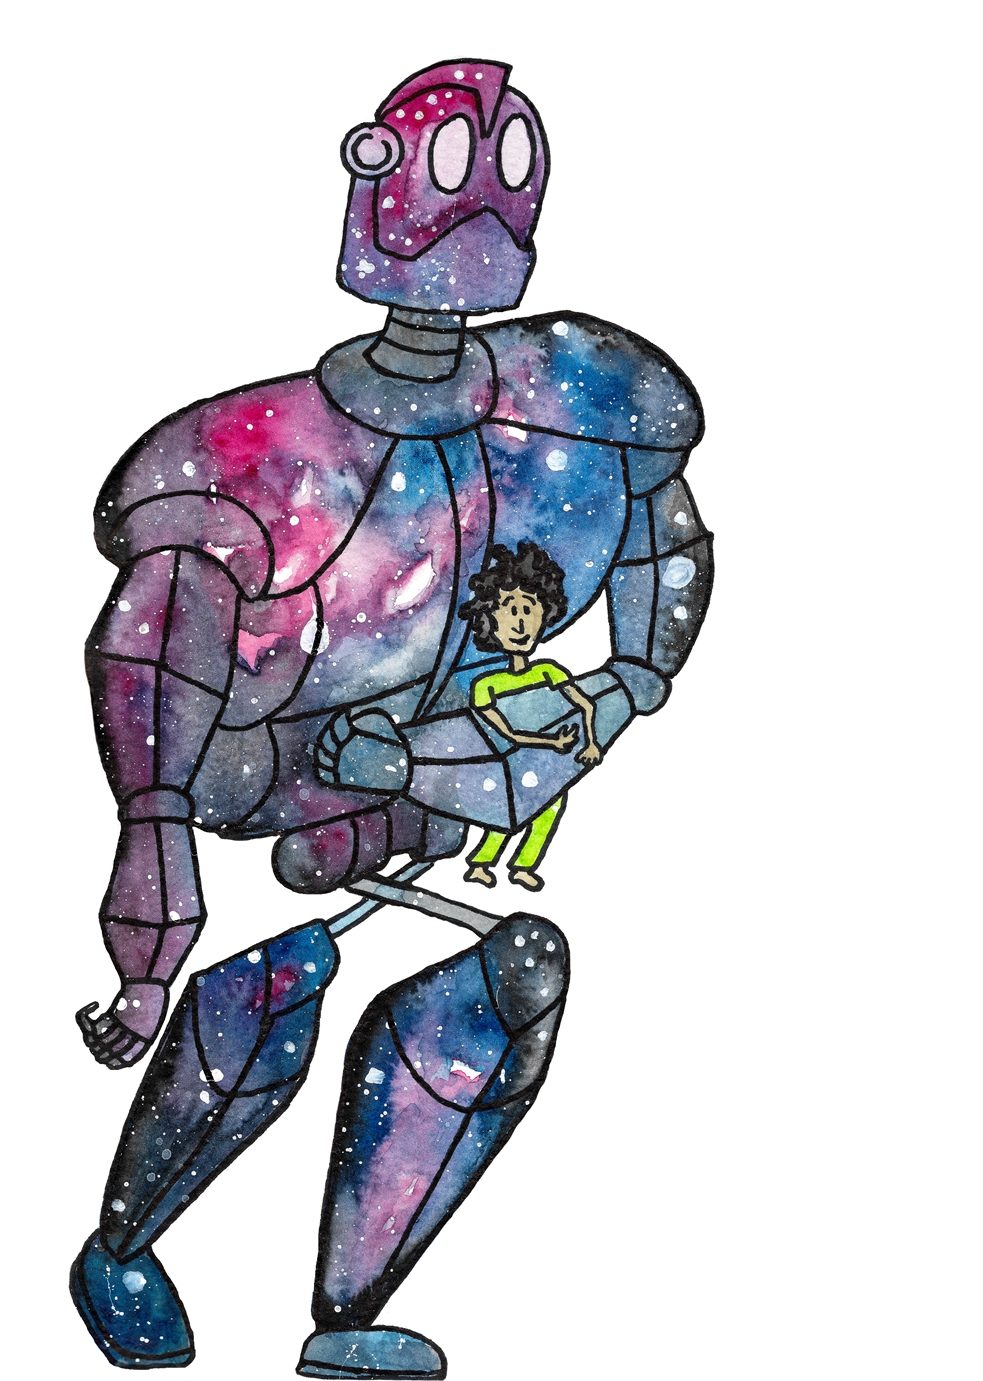 Watercolour drawing of a robot in shades of blue and pink carrying the young boy in its arms.